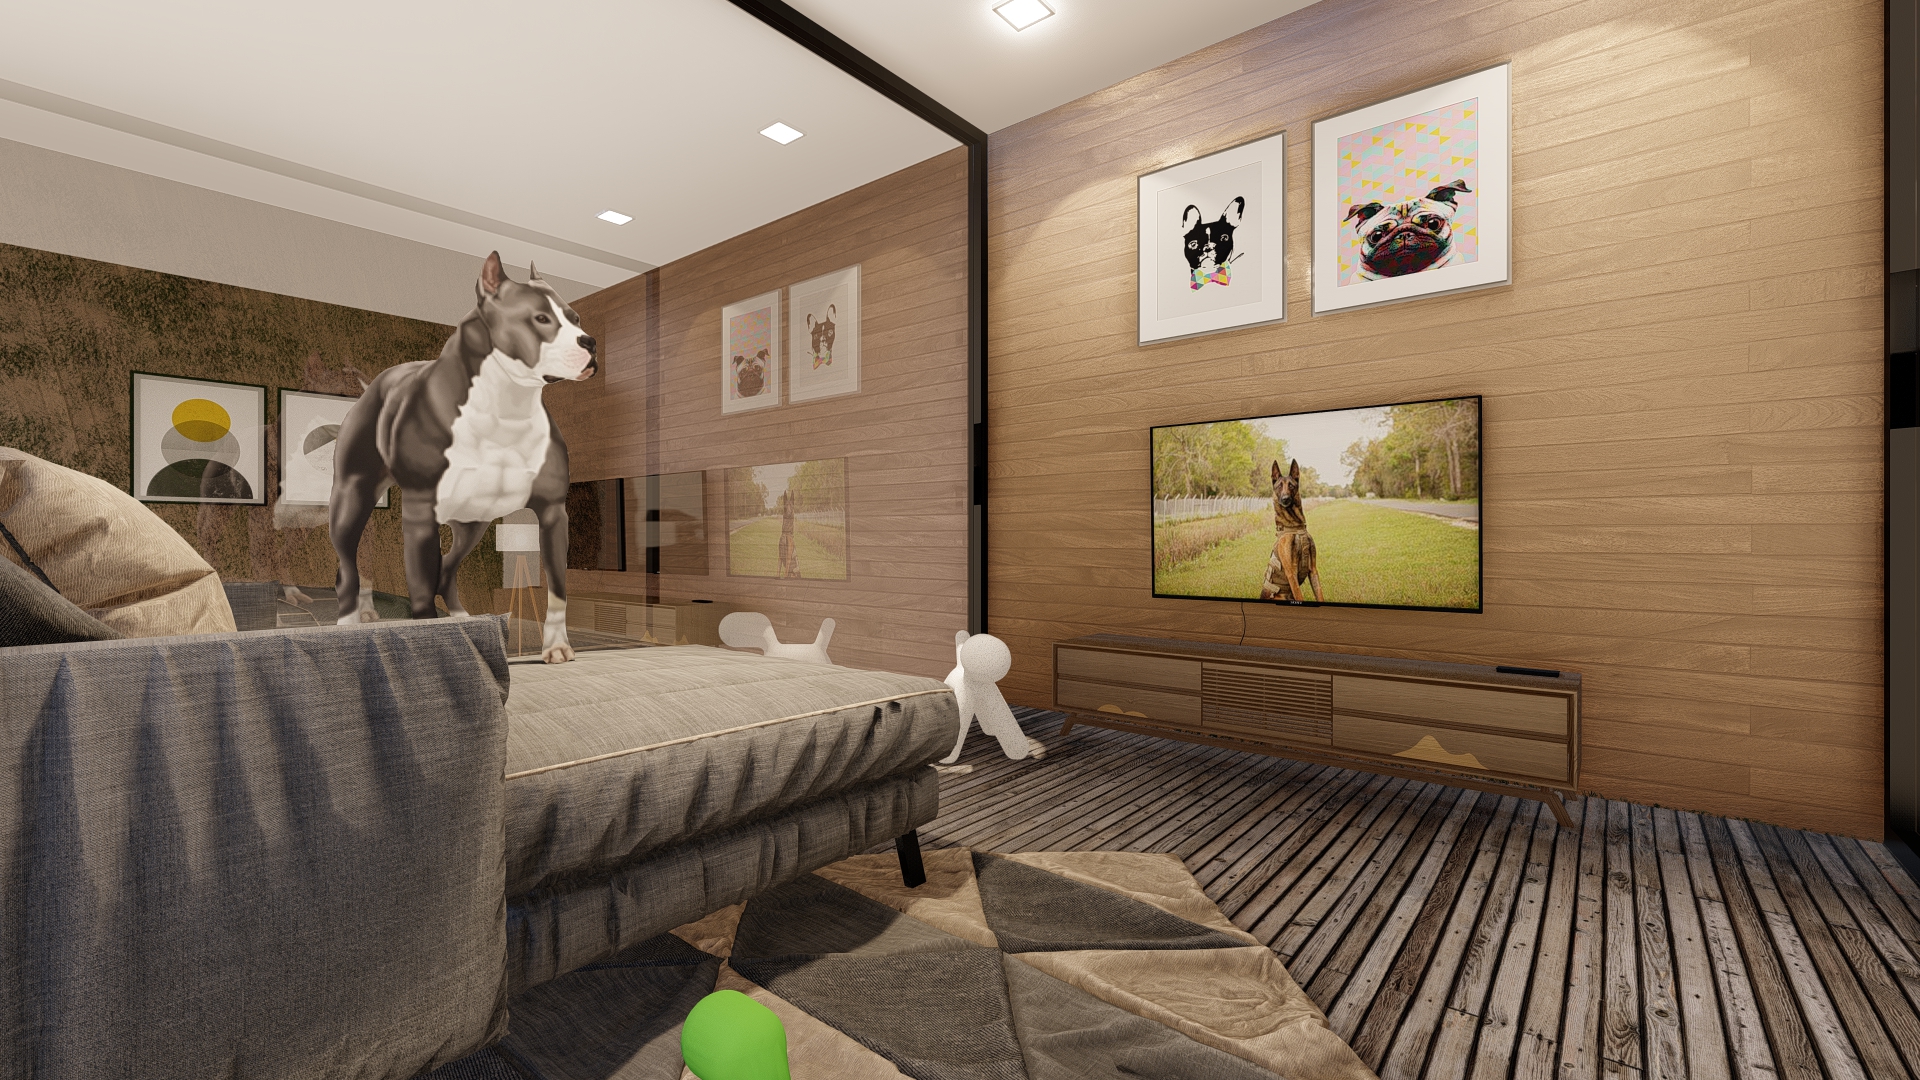 The new Hotel will offer much larger, more comfortable suites for our pups. 